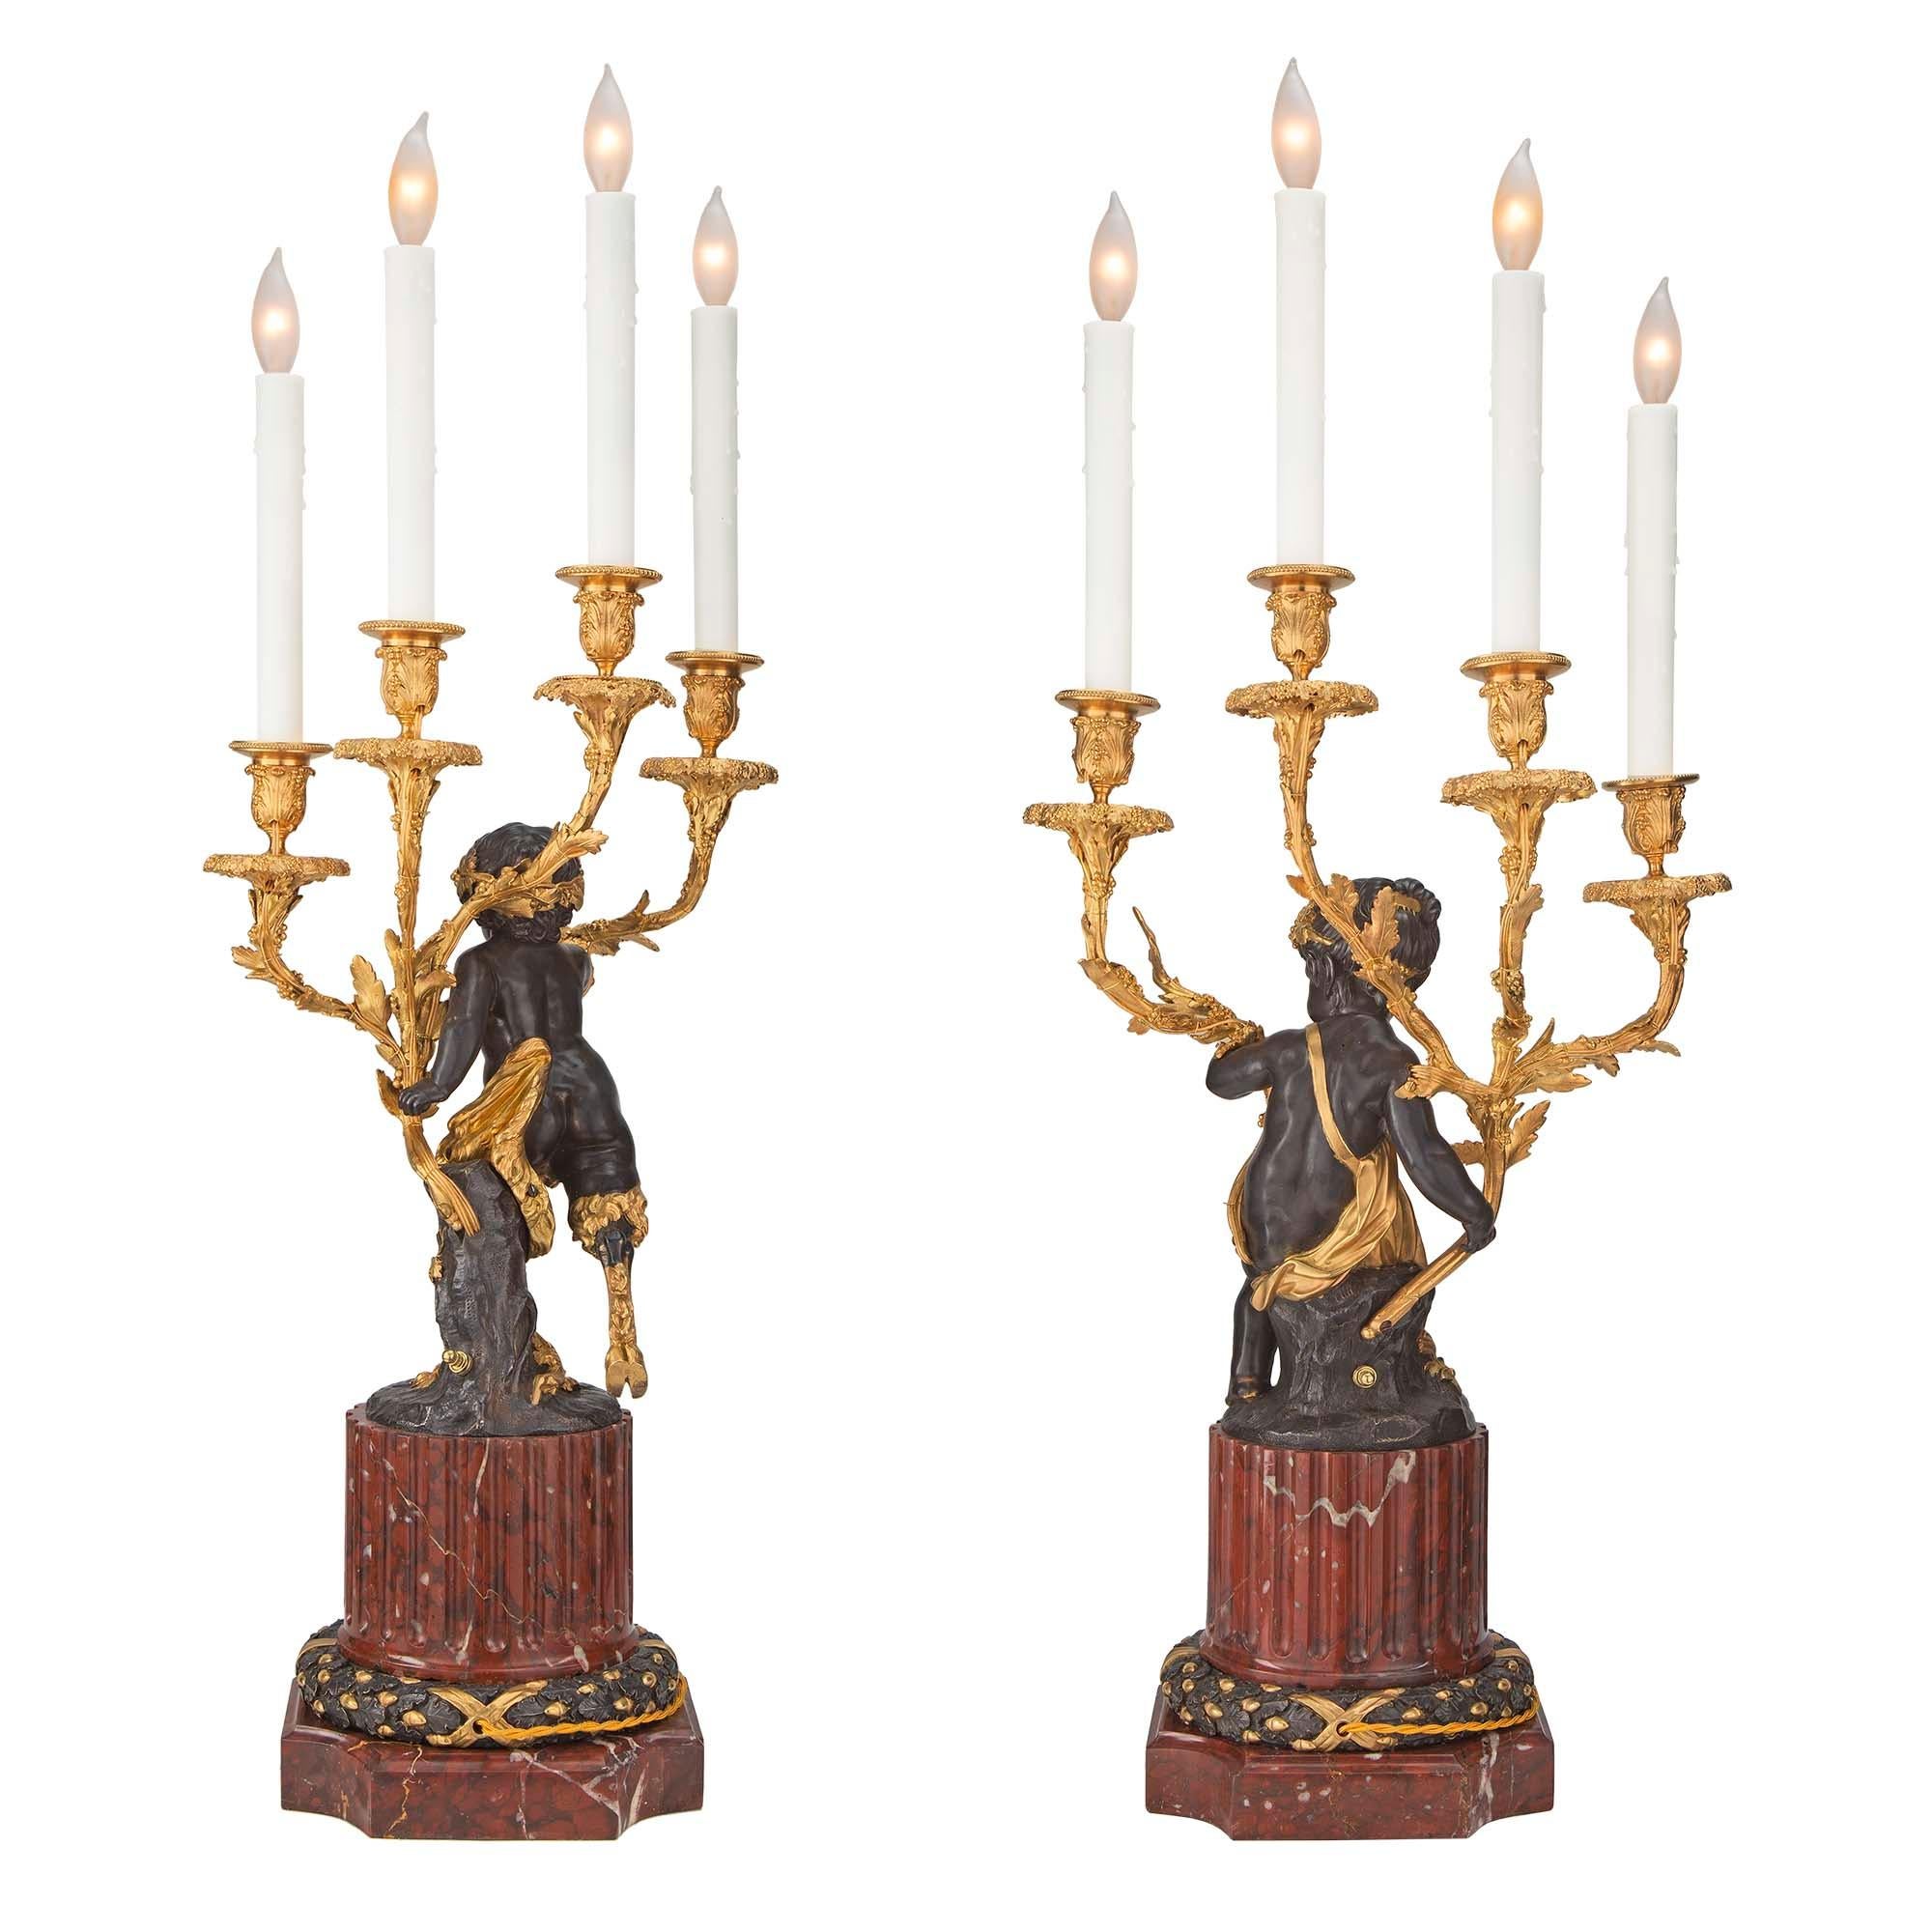 A charming and high quality true pair of French 19th century Louis XVI st. Rouge Griotte marble, patinated bronze, and ormolu four arm candelabras mounted into lamps. Each lamp is raised by a square base with concave corners below a striking